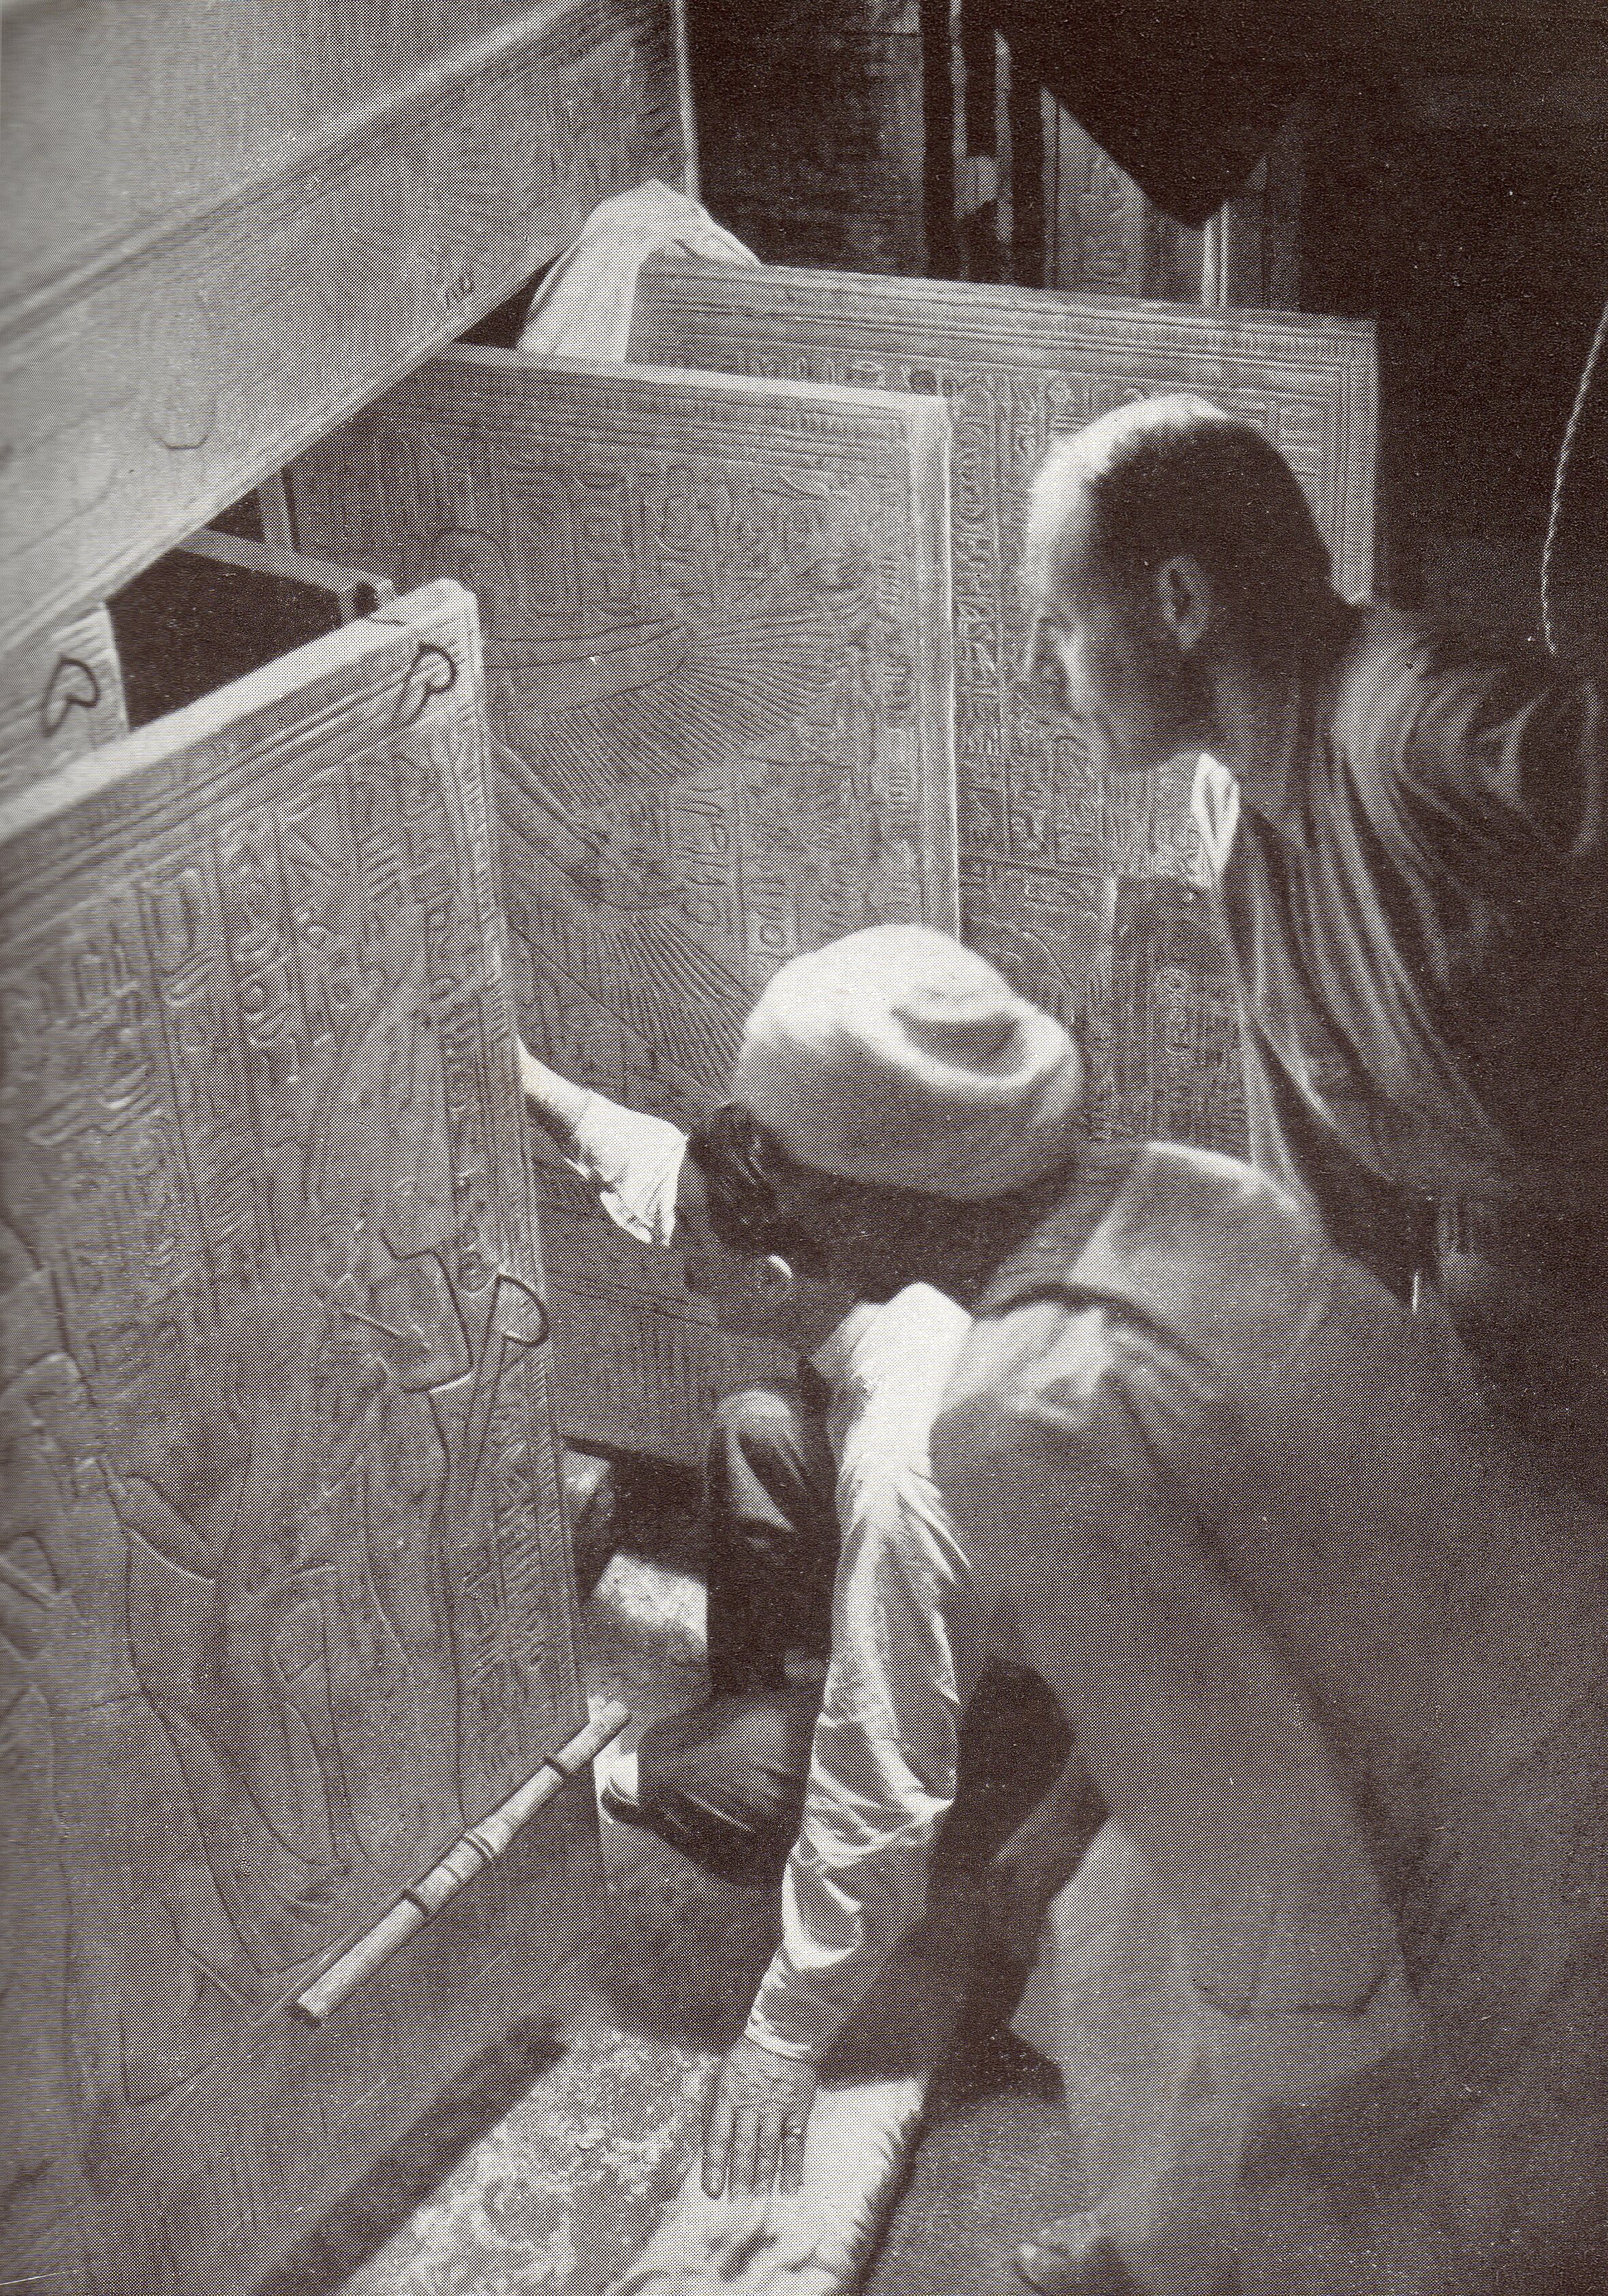 A man opens a decorated door as two other men watch